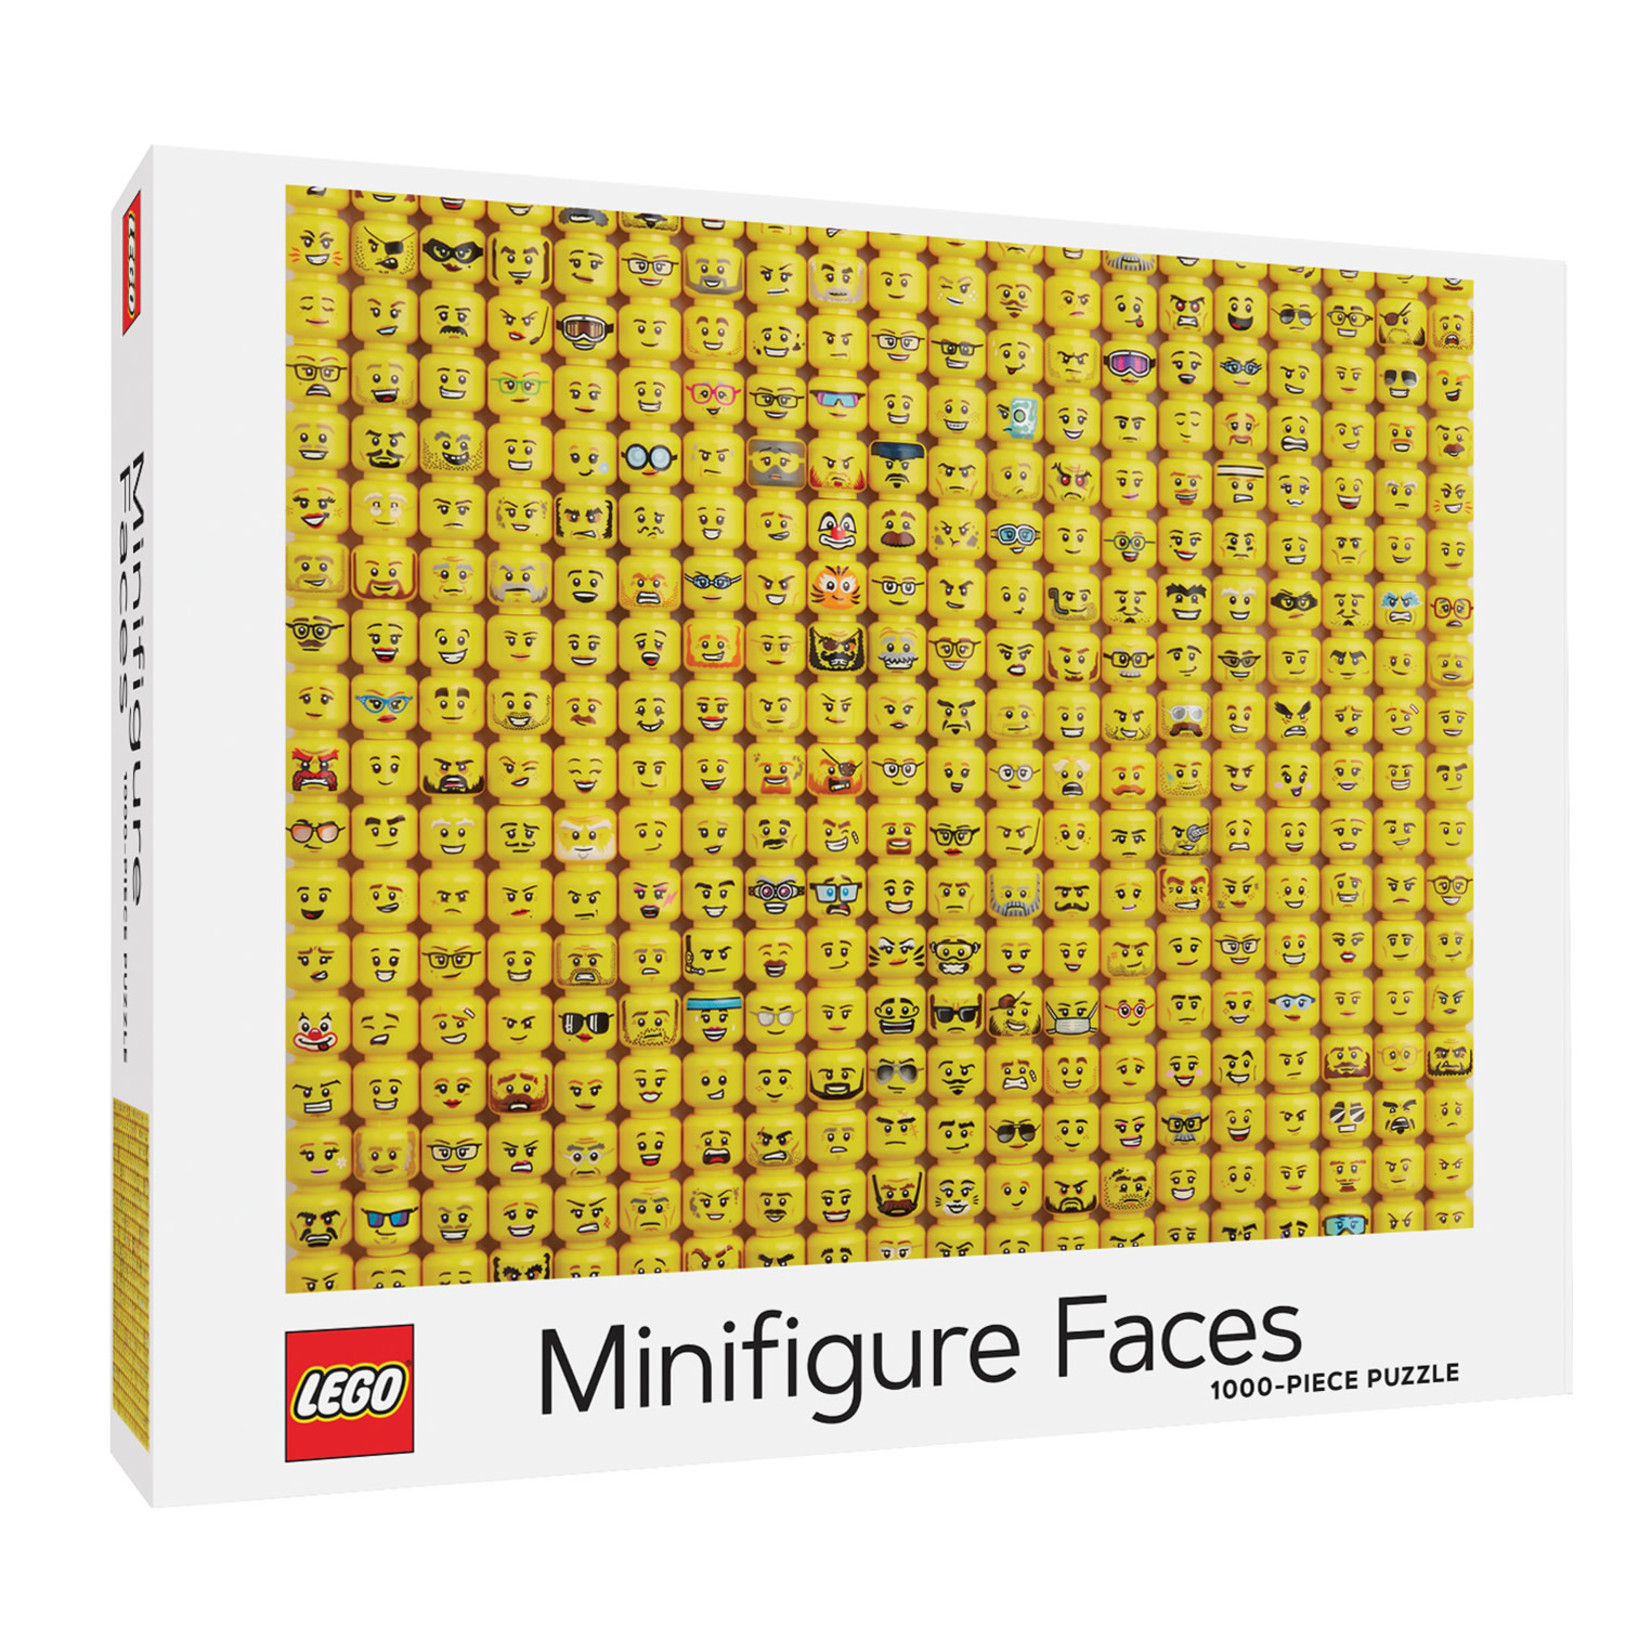 Chronicle Books Lego Minifigure Faces by Michelle Claire - 1000 Piece Jigsaw Puzzle